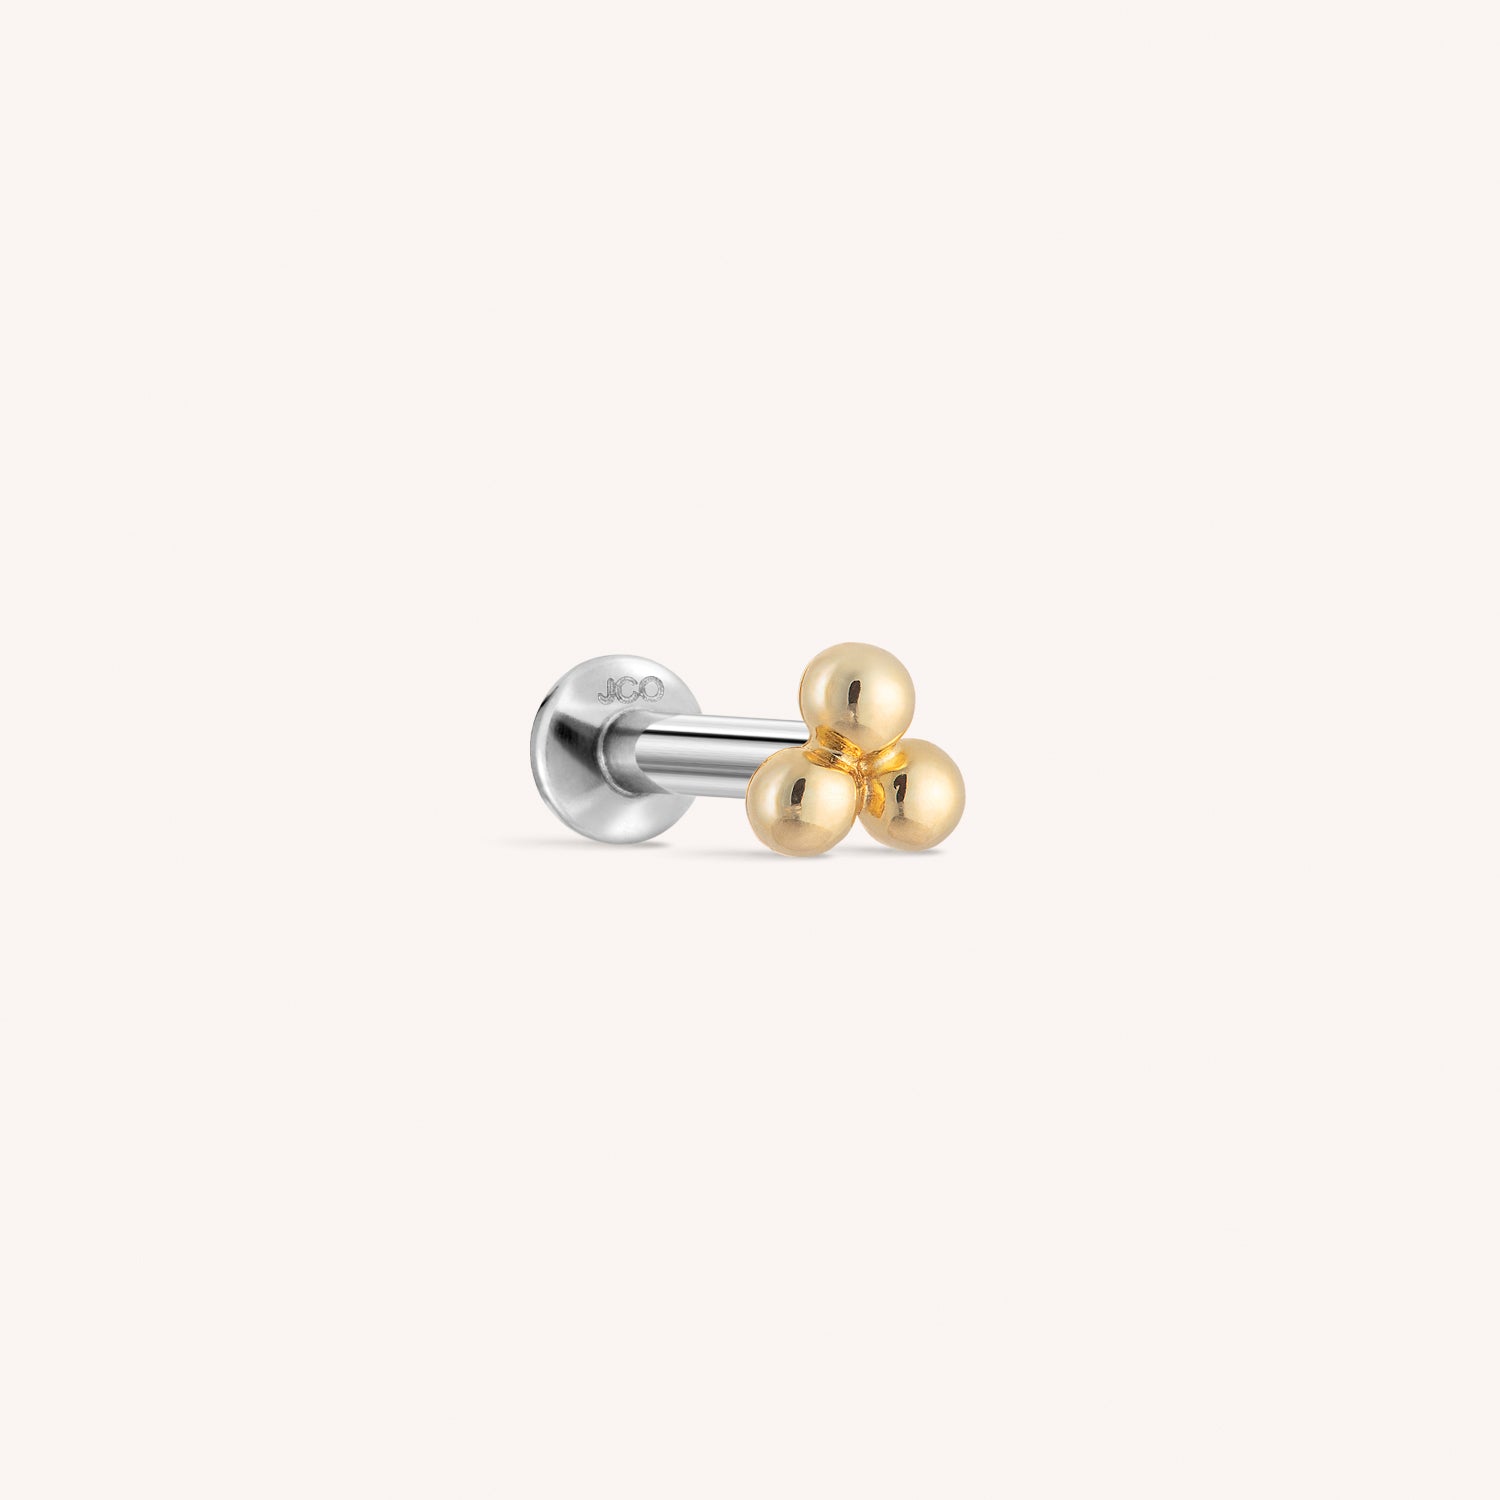 Pearl Screw back stud earrings Gold Silver baby kids Girls tiny small Gift  uk